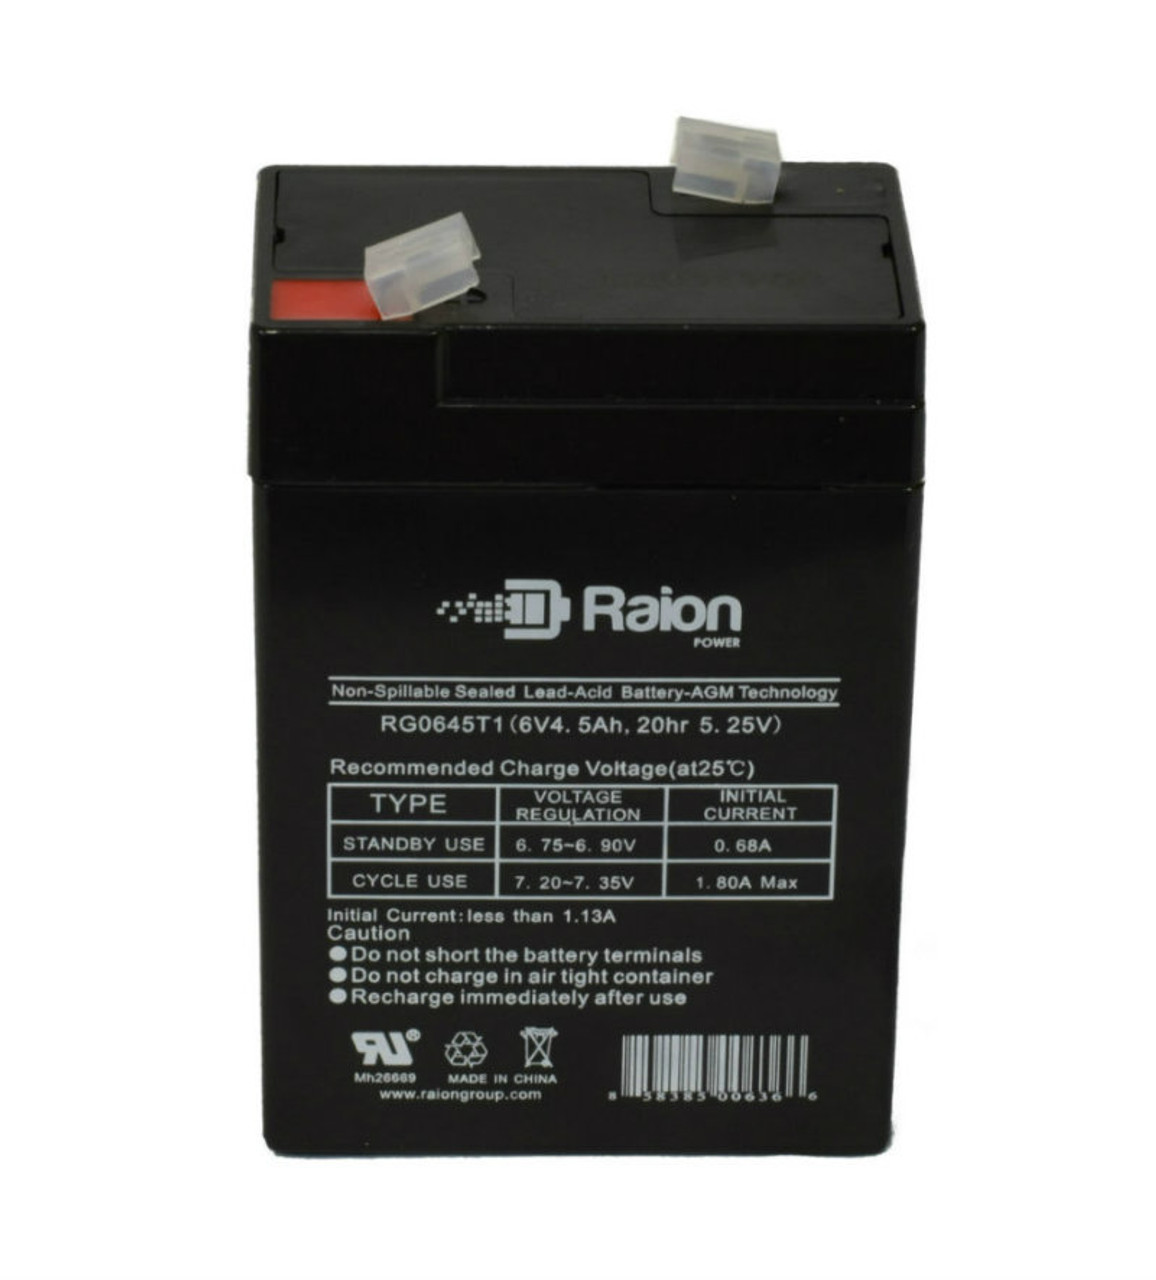 Raion Power RG0645T1 Replacement Battery Cartridge for National Power GS012P3-LL